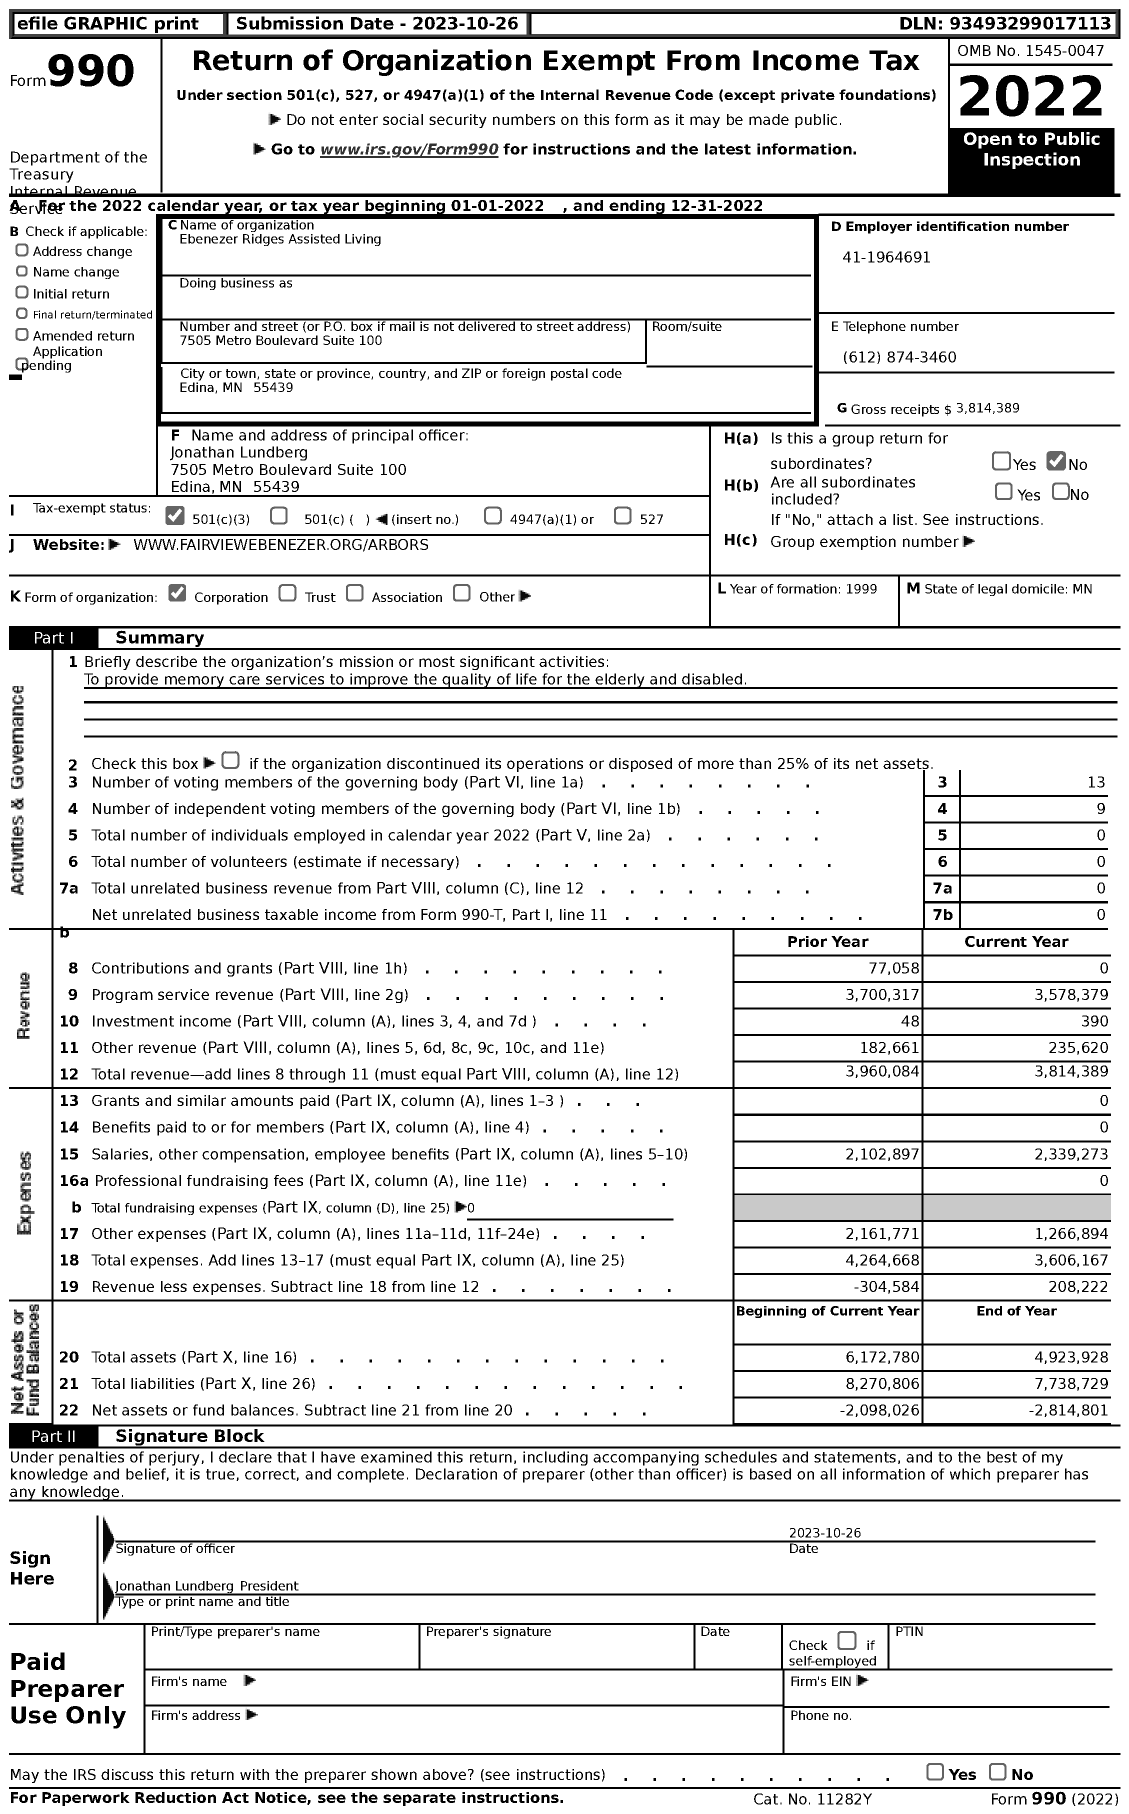 Image of first page of 2022 Form 990 for Ebenezer Ridges Assisted Living